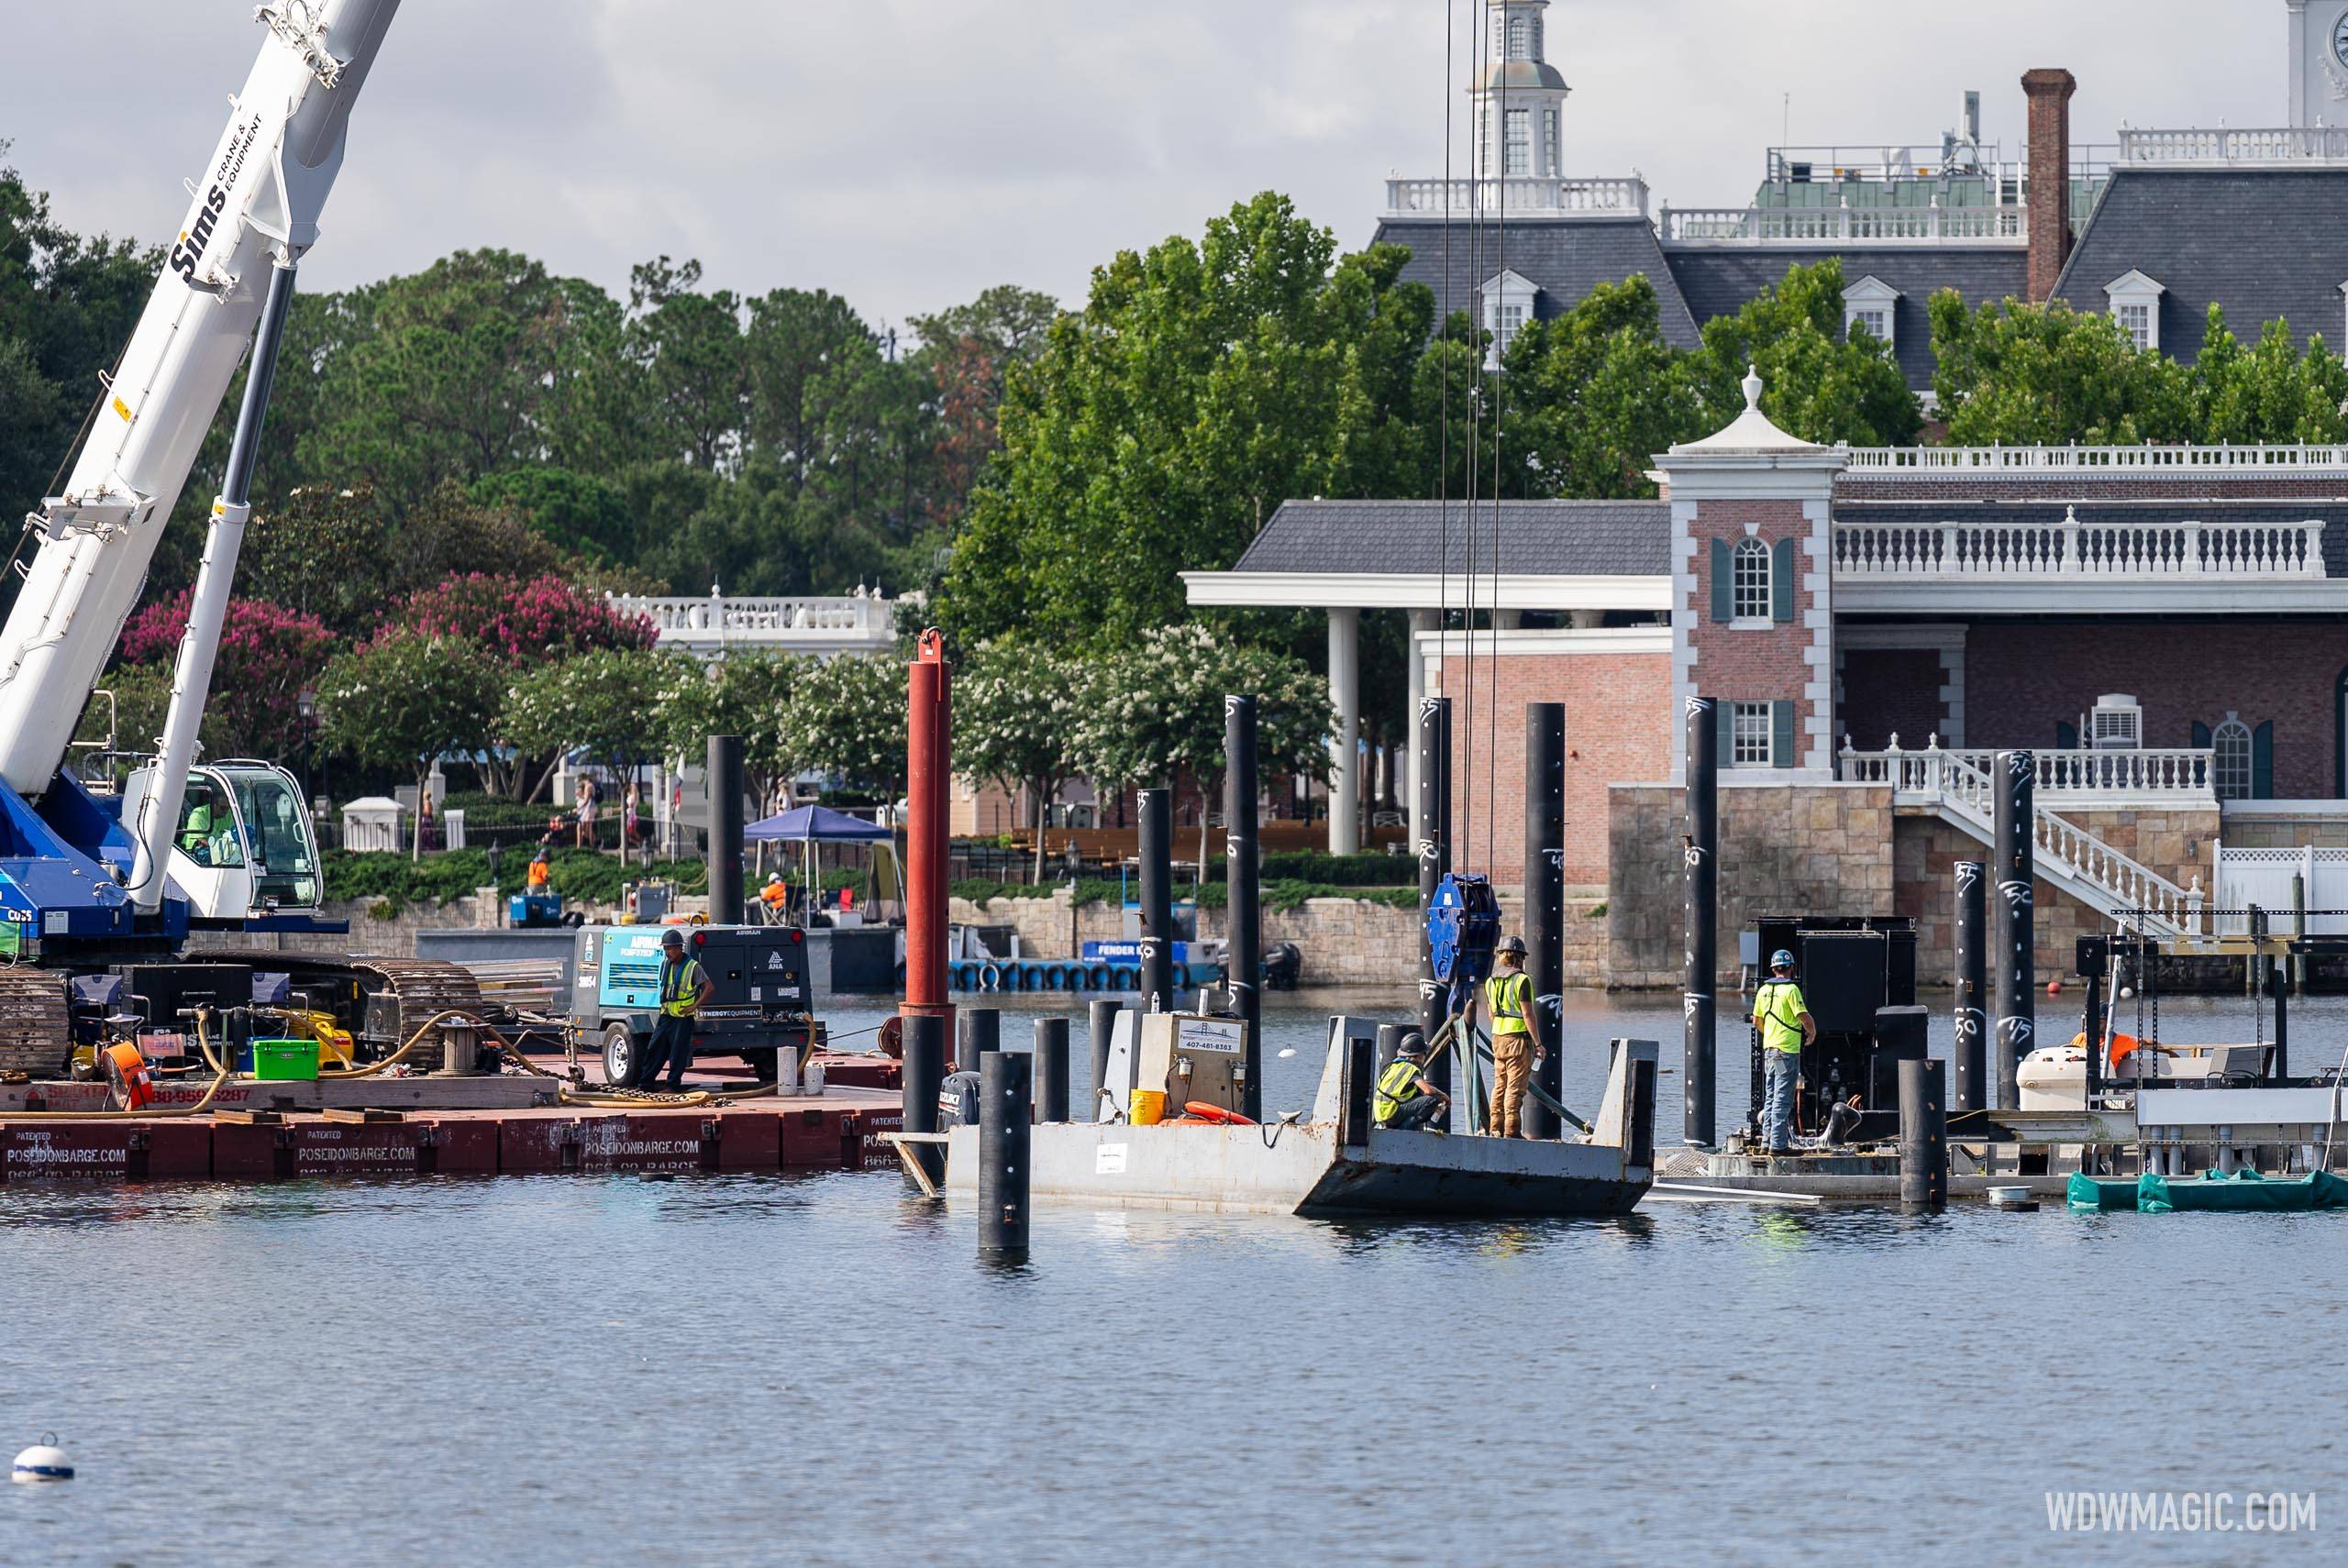 More pilings added to EPCOT's World Showcase Lagoon as preparations for new fireworks show continue